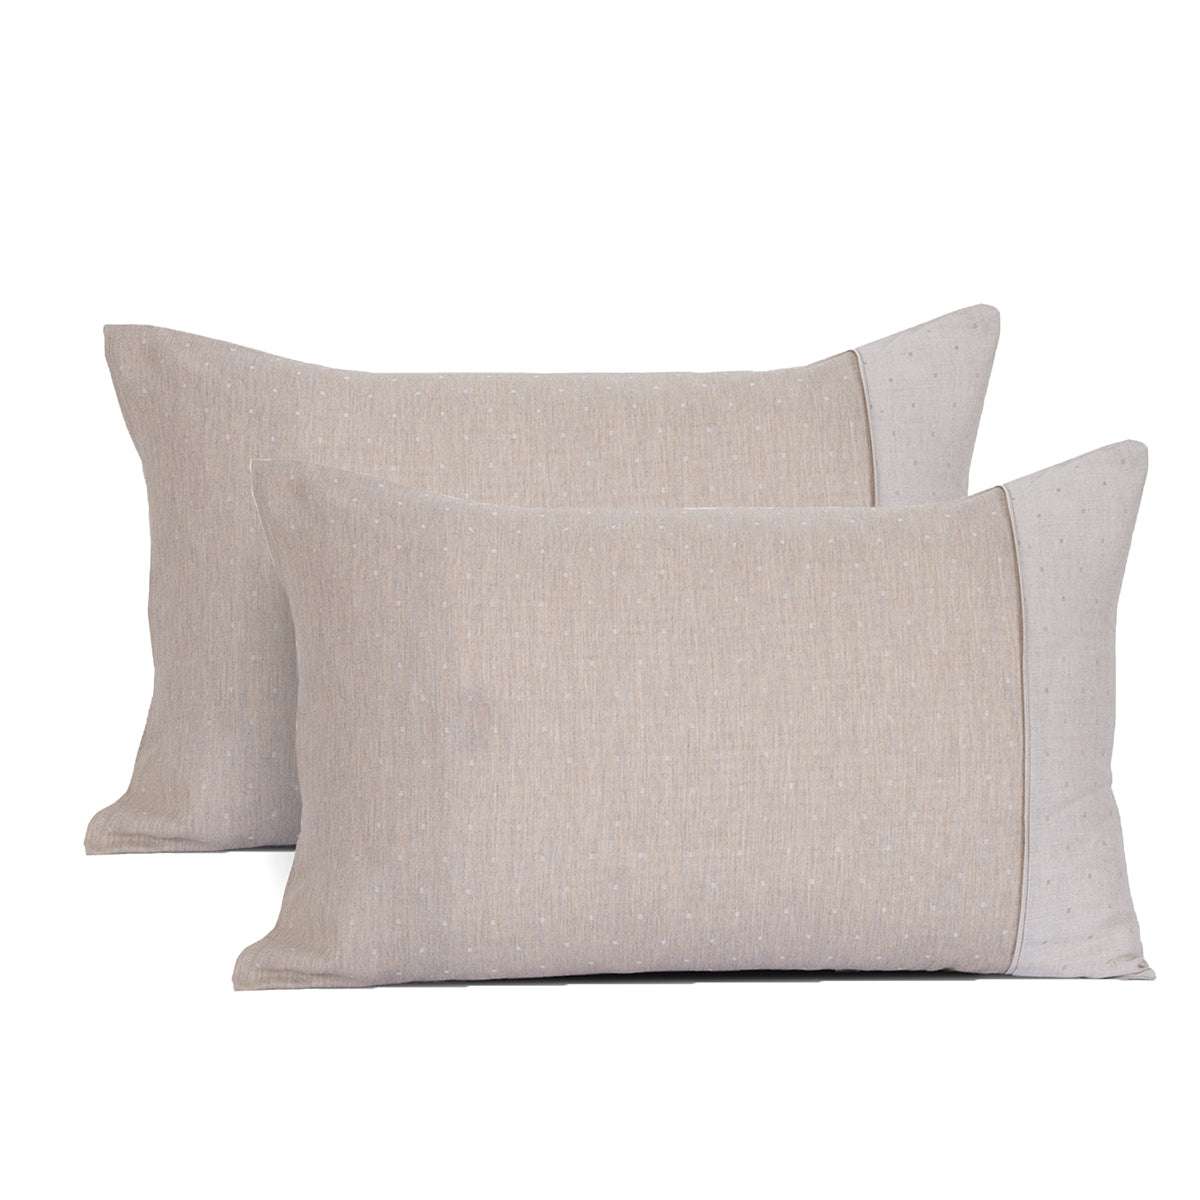 Muted Dot Made With Egyptian Cotton Woven 2PC Pillow Case Set